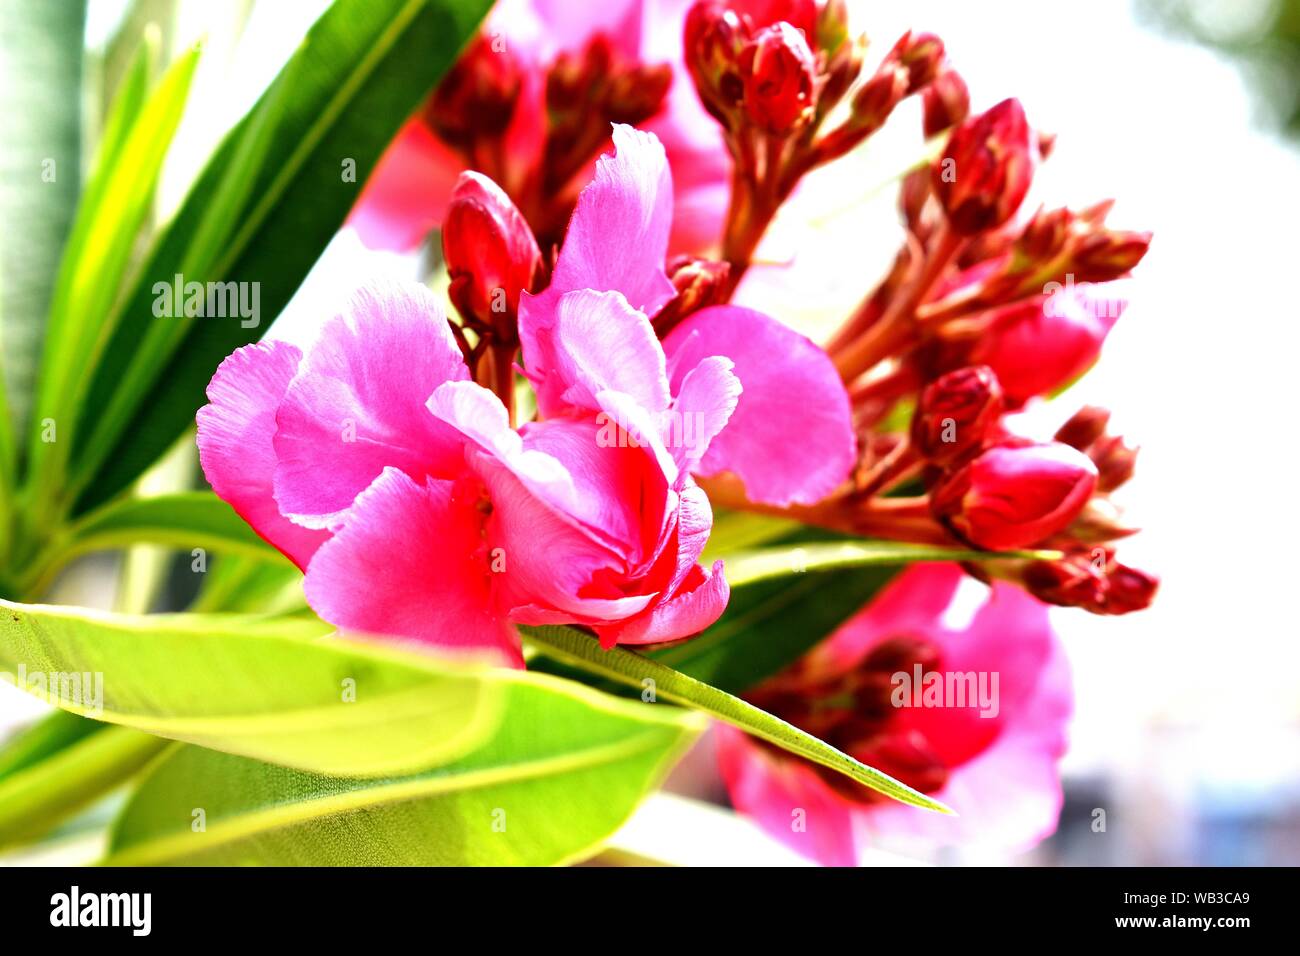 A bunch of Flower Stock Photo